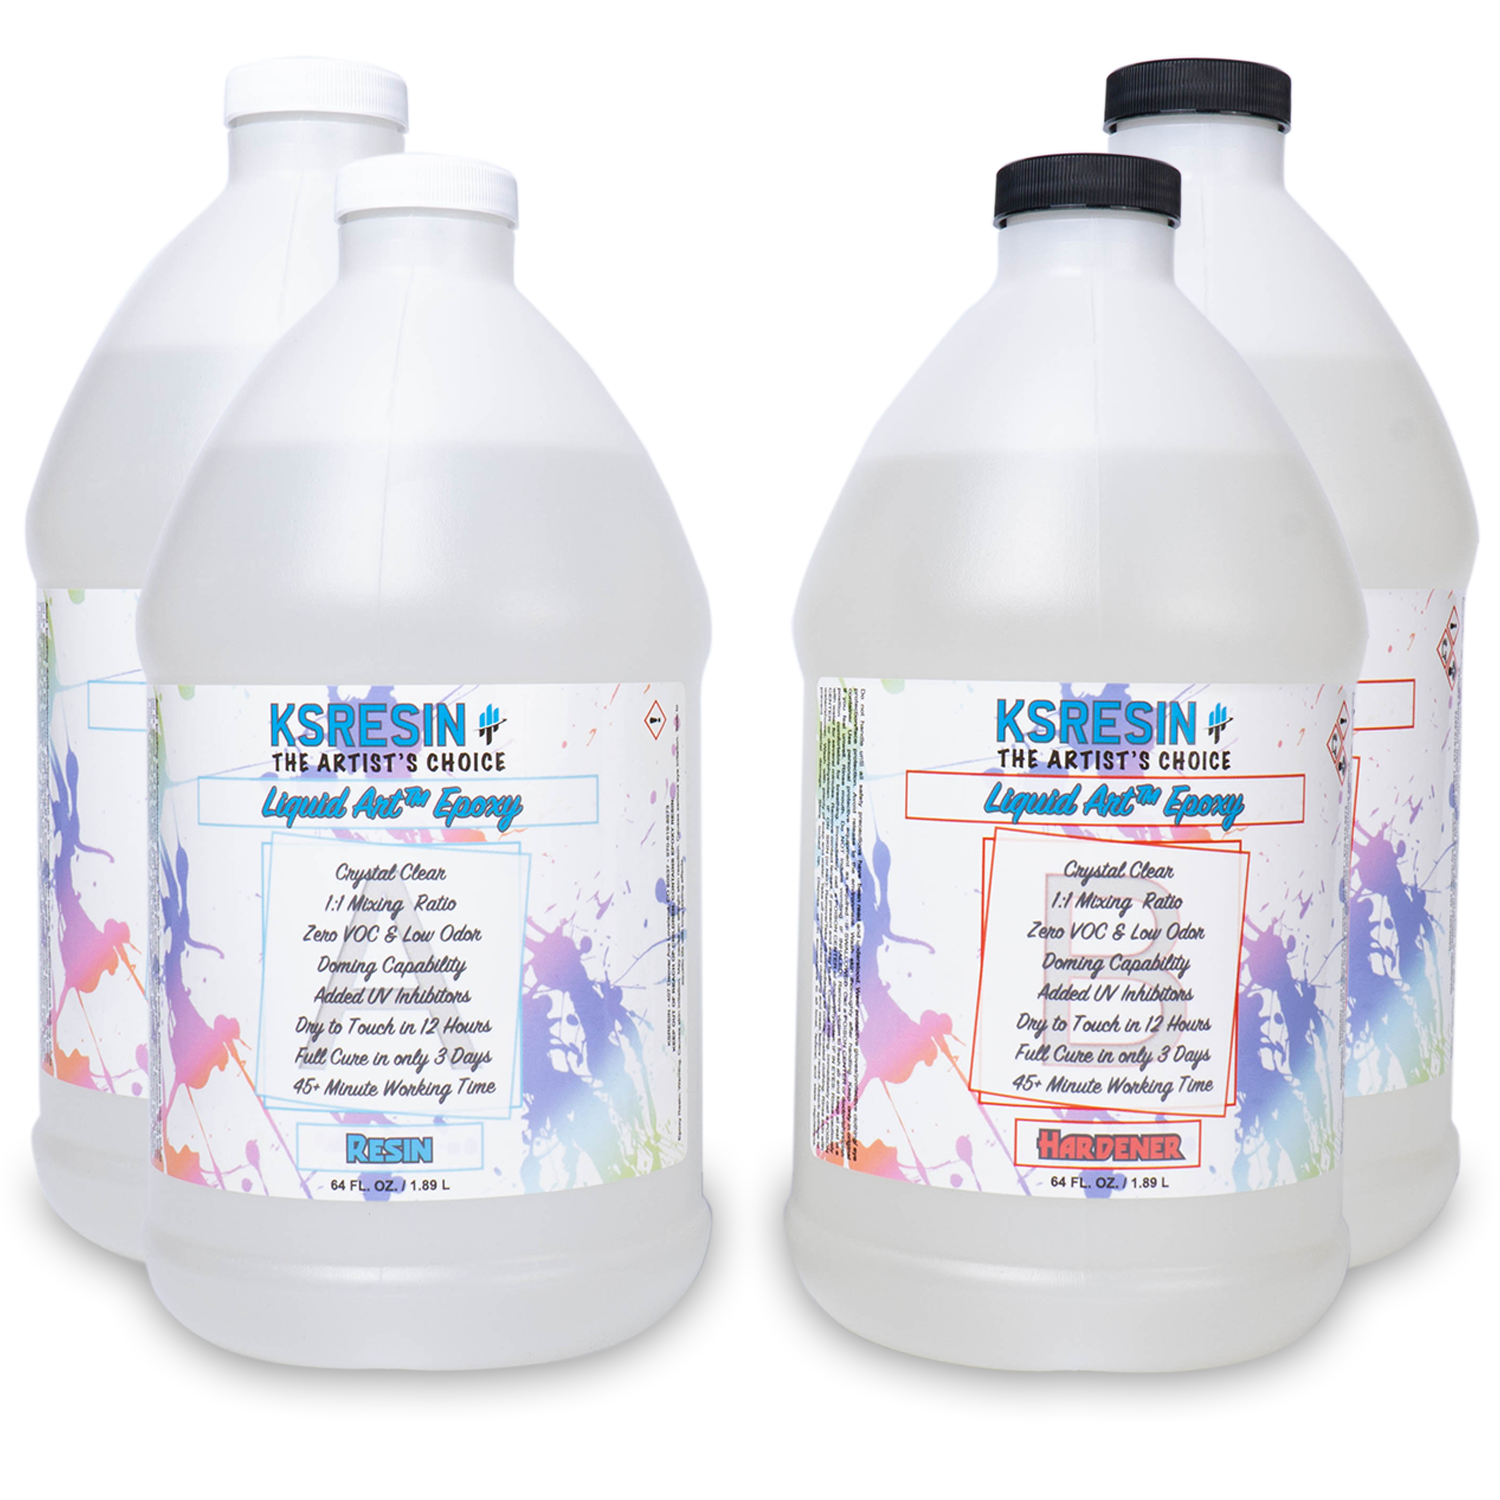 2 Part Clear Epoxy Resin, Tabletop Epoxy, Art Resin, Crafts, Shiny High Gloss Epoxy Finish, Low Odor, Easy Mixing